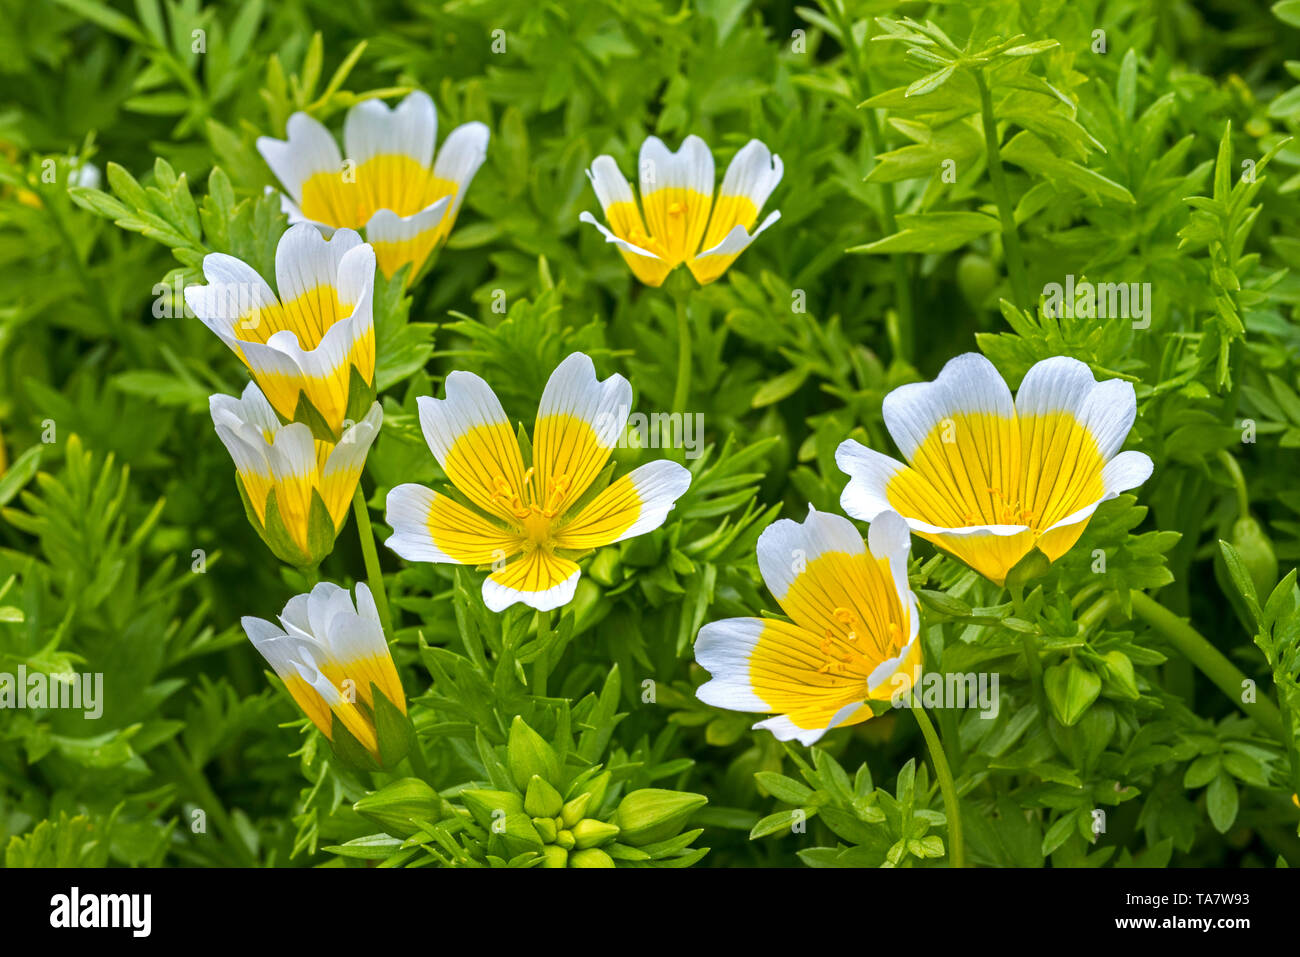 Douglas' meadowfoam / poached egg plant (Limnanthes douglasii) in flower, native to California and Oregon Stock Photo